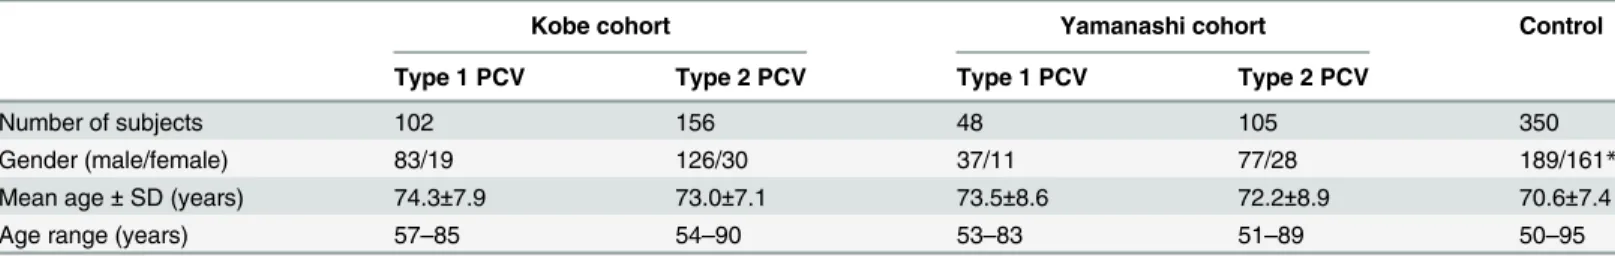 Table 1. Data summary of the Type 1, Type 2 PCV and control subjects.